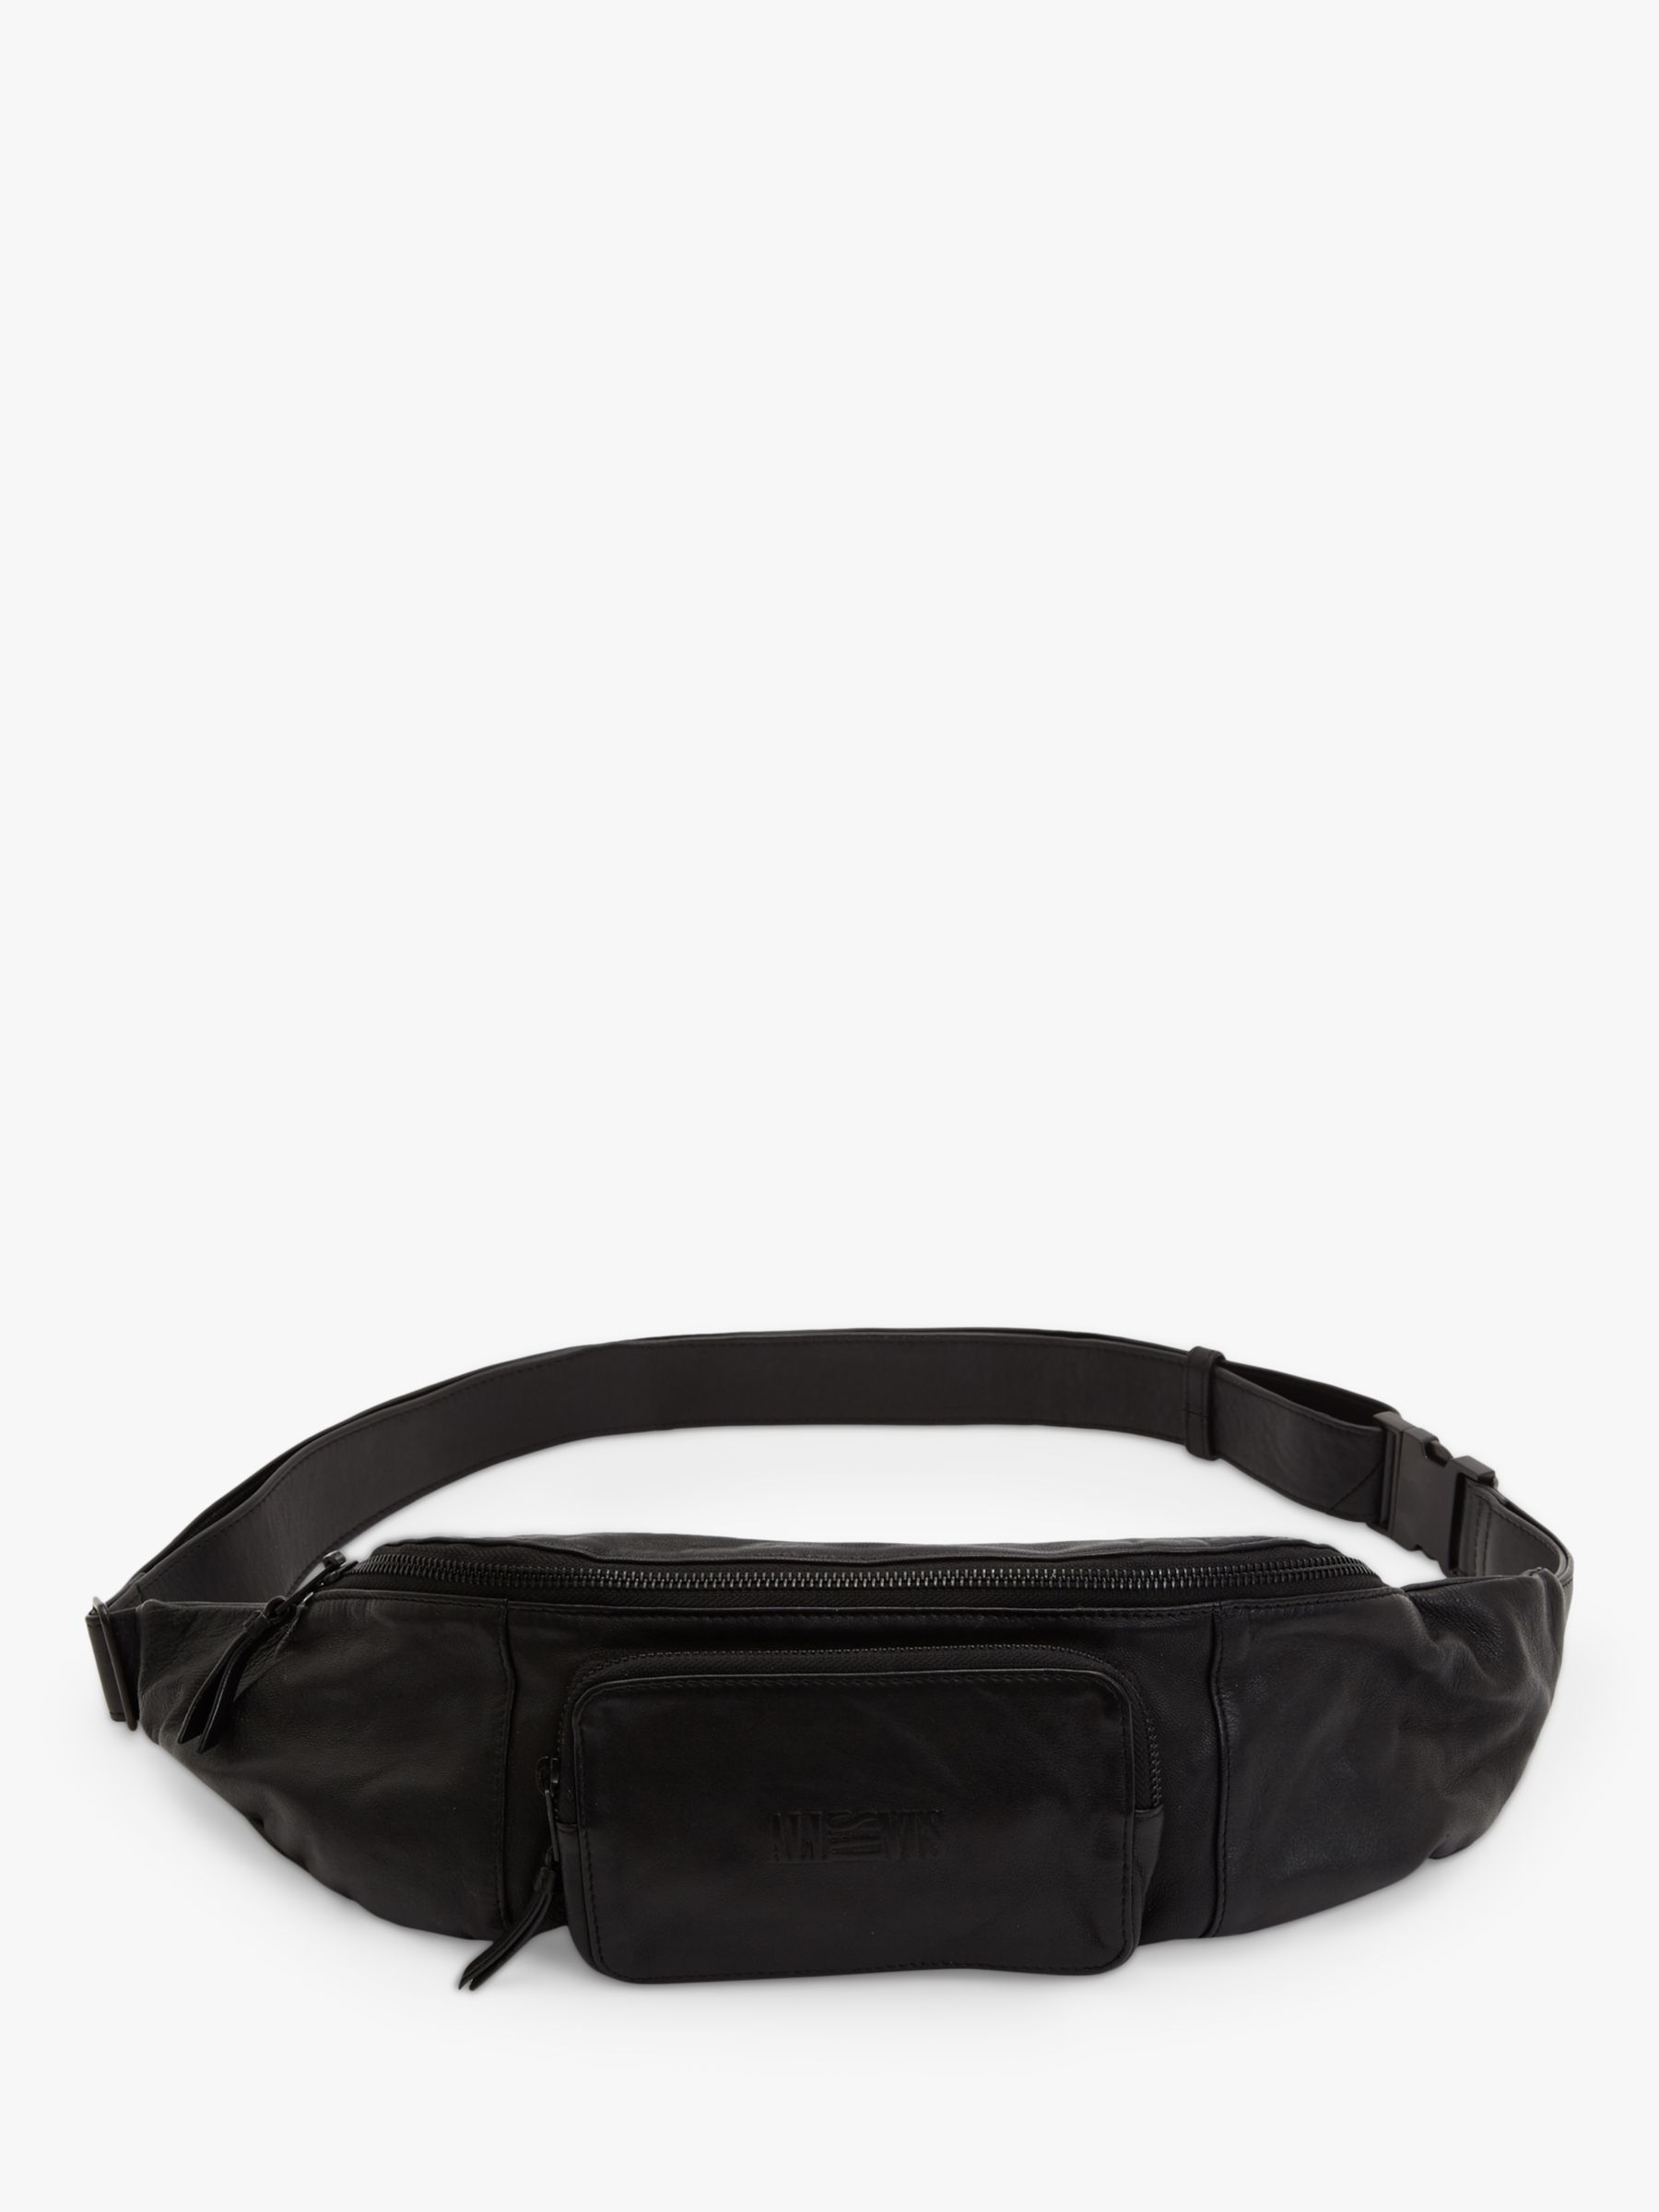 Allsaints Oppose Leather Bum Bag, Black, One Size